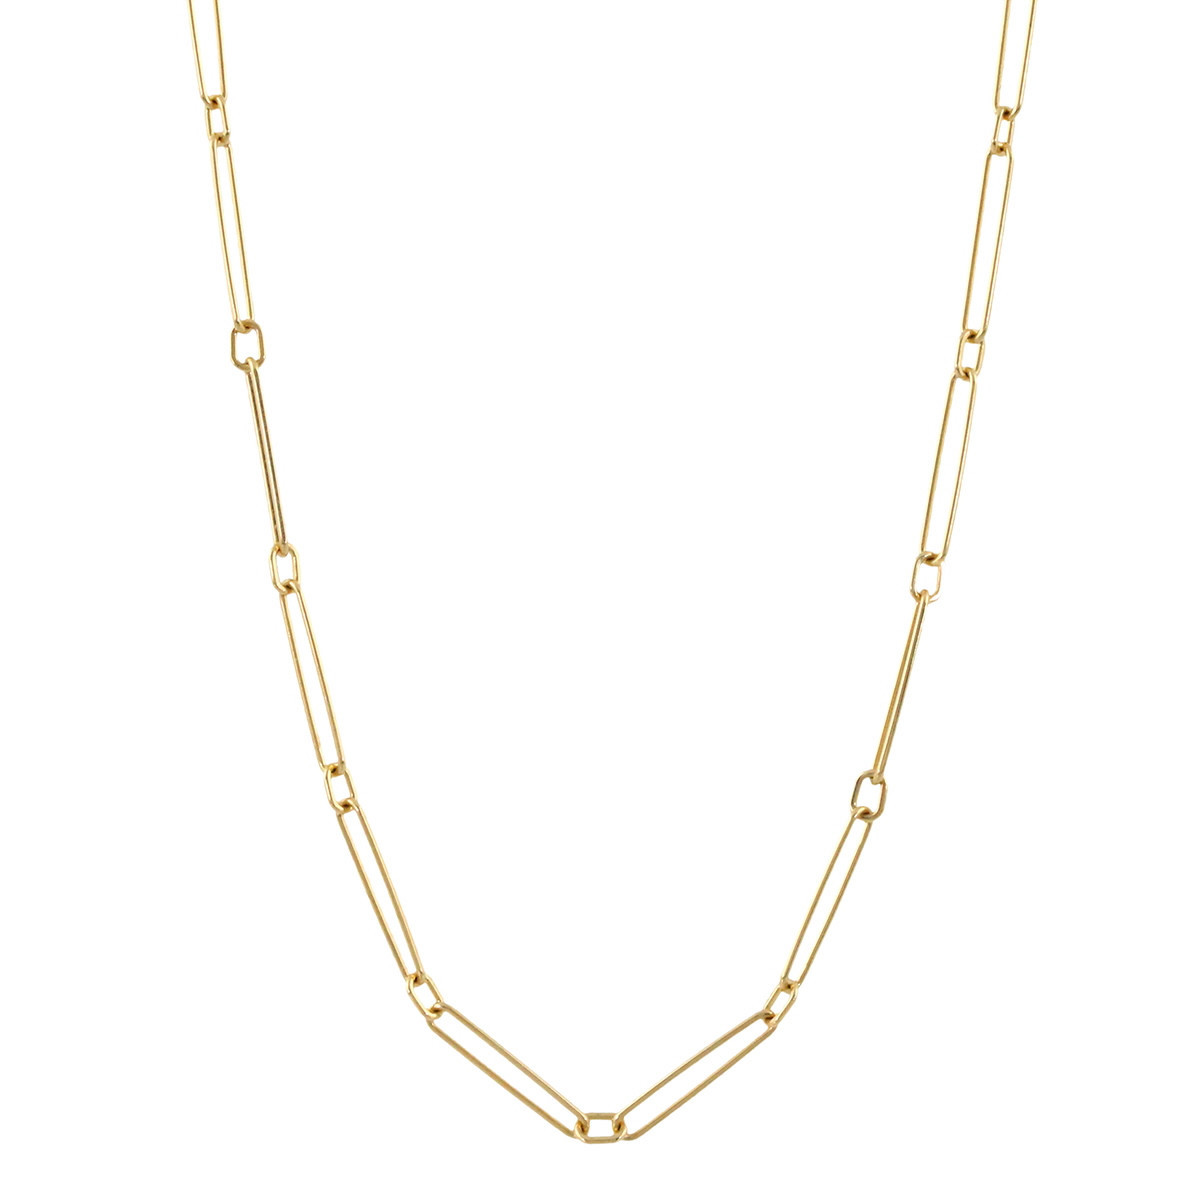 ELONGATED GOLD LINK CHAIN